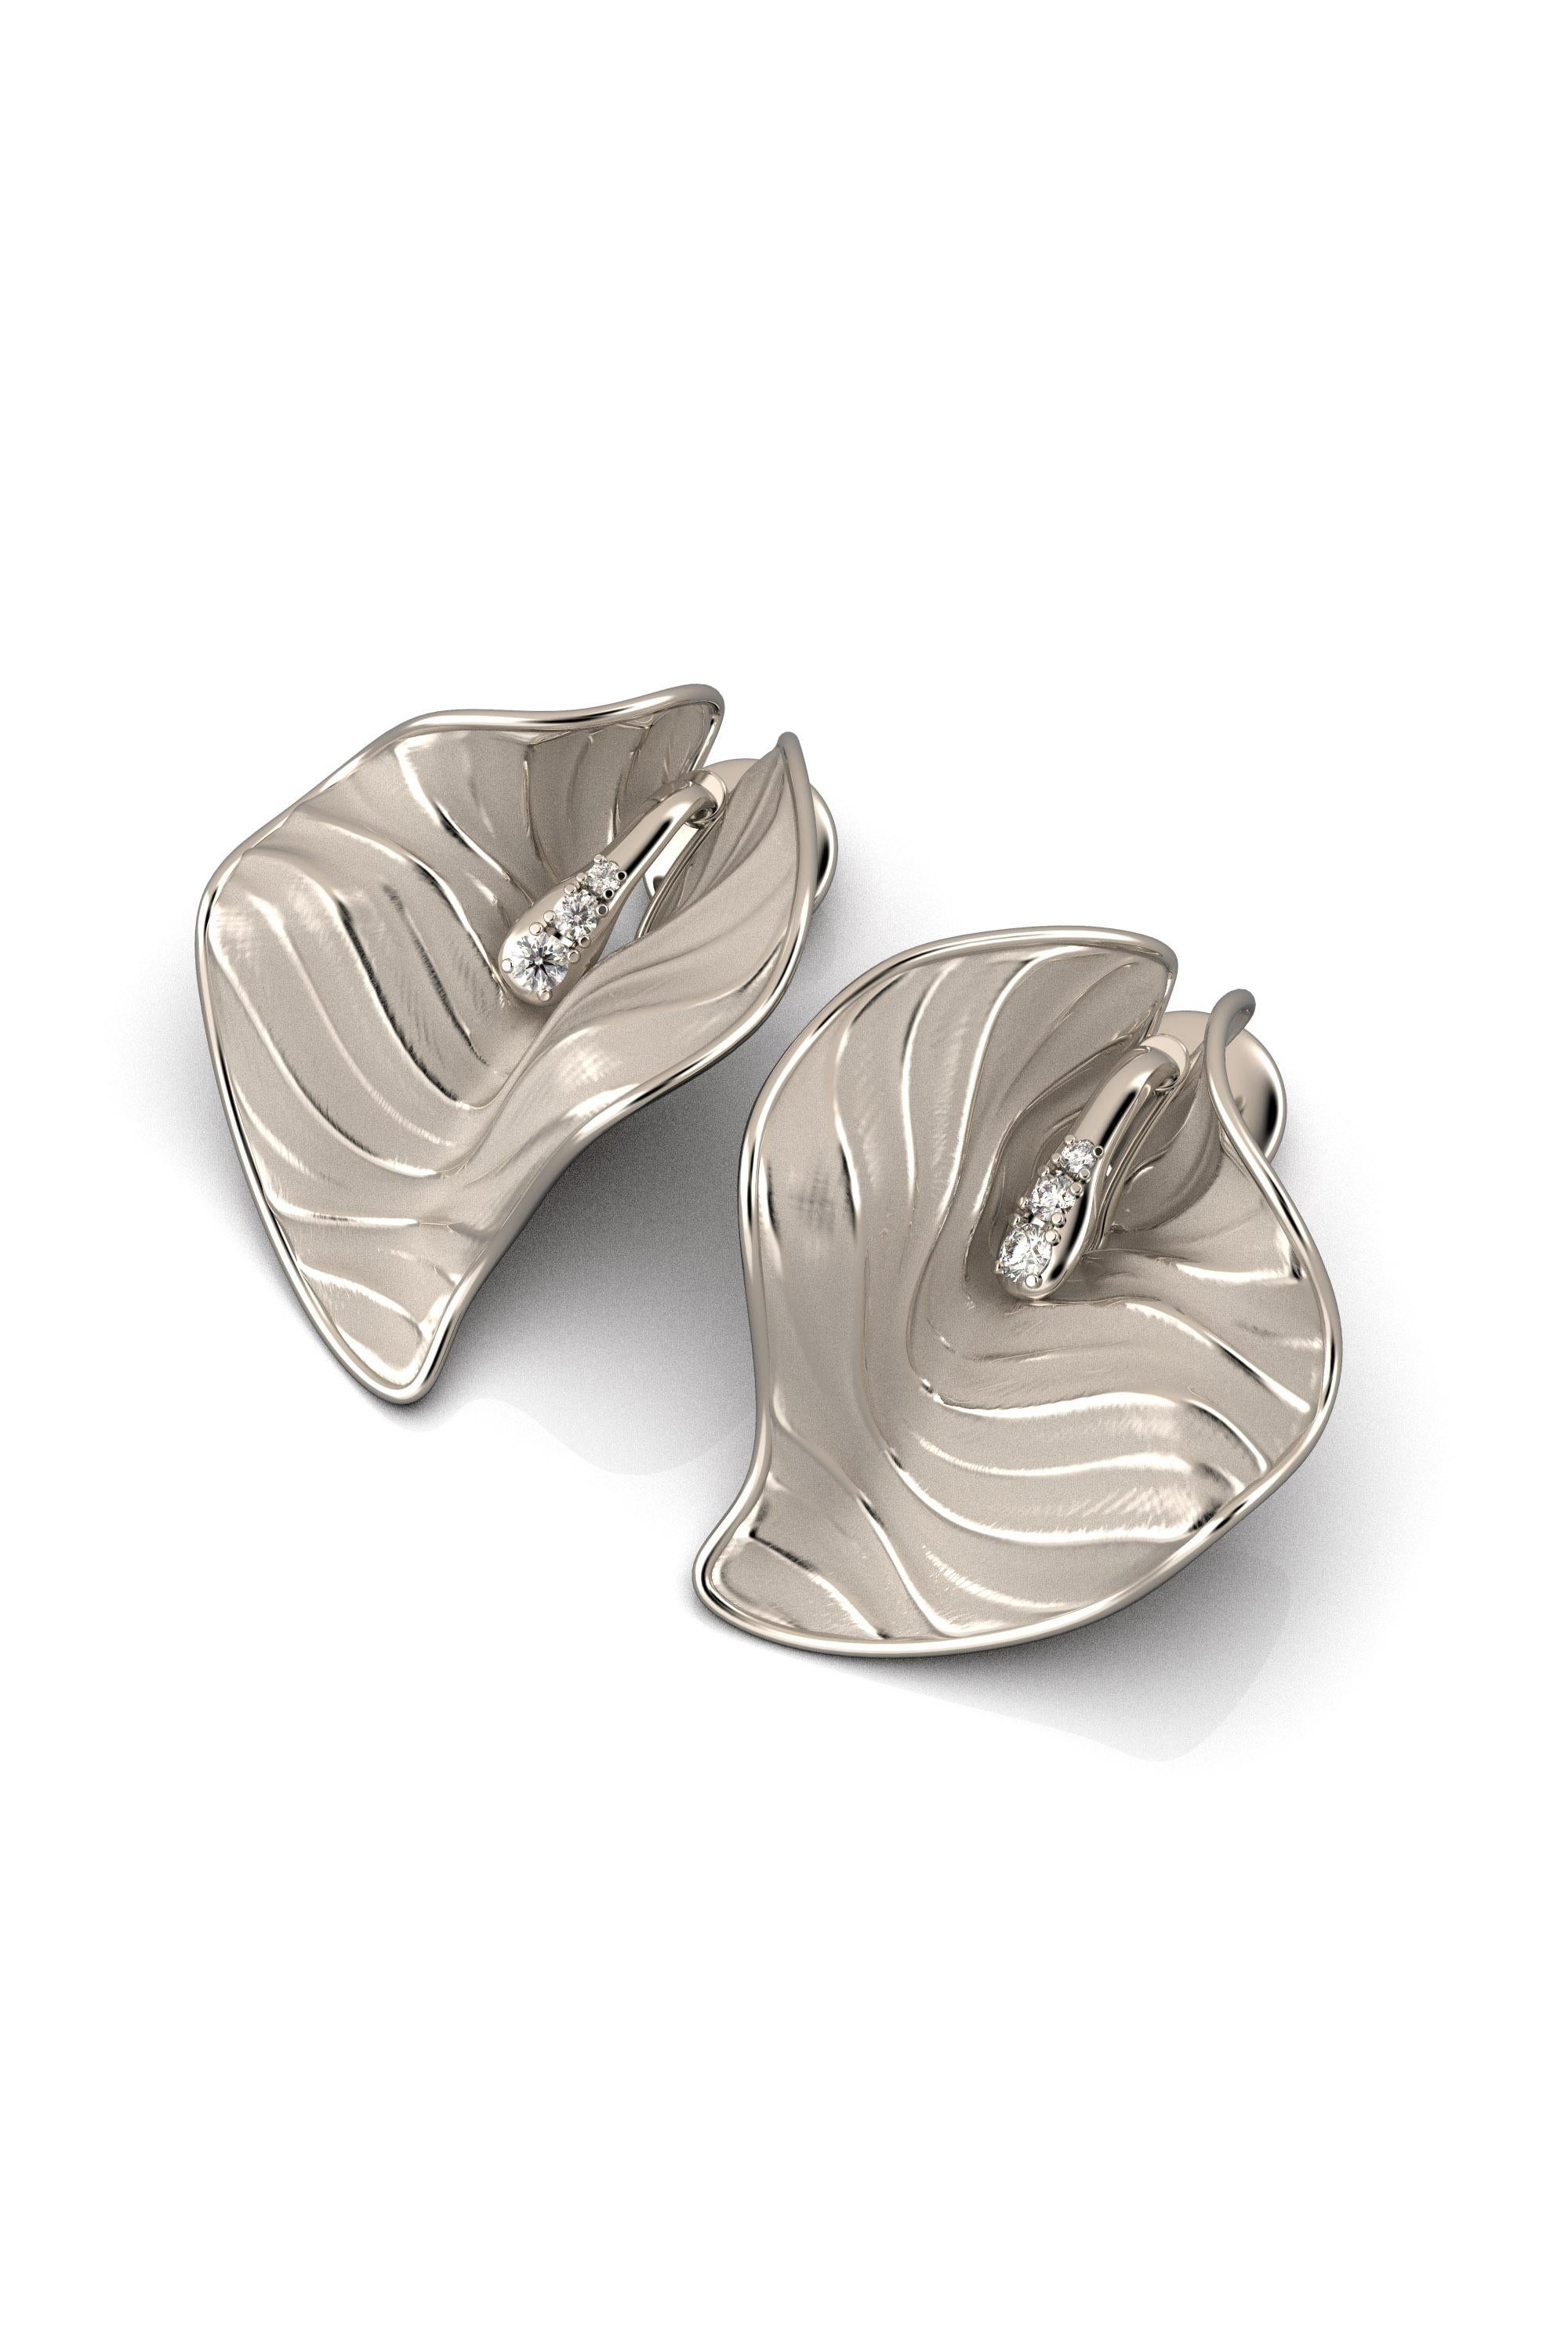 Made to order.
Calla earrings have an interplay of sinuous movements, embellished by the diamonds set on the pistil.
A sophisticated and unique piece of jewelry.  
Vento is a collection created to enhance feminine beauty with soft surface movements